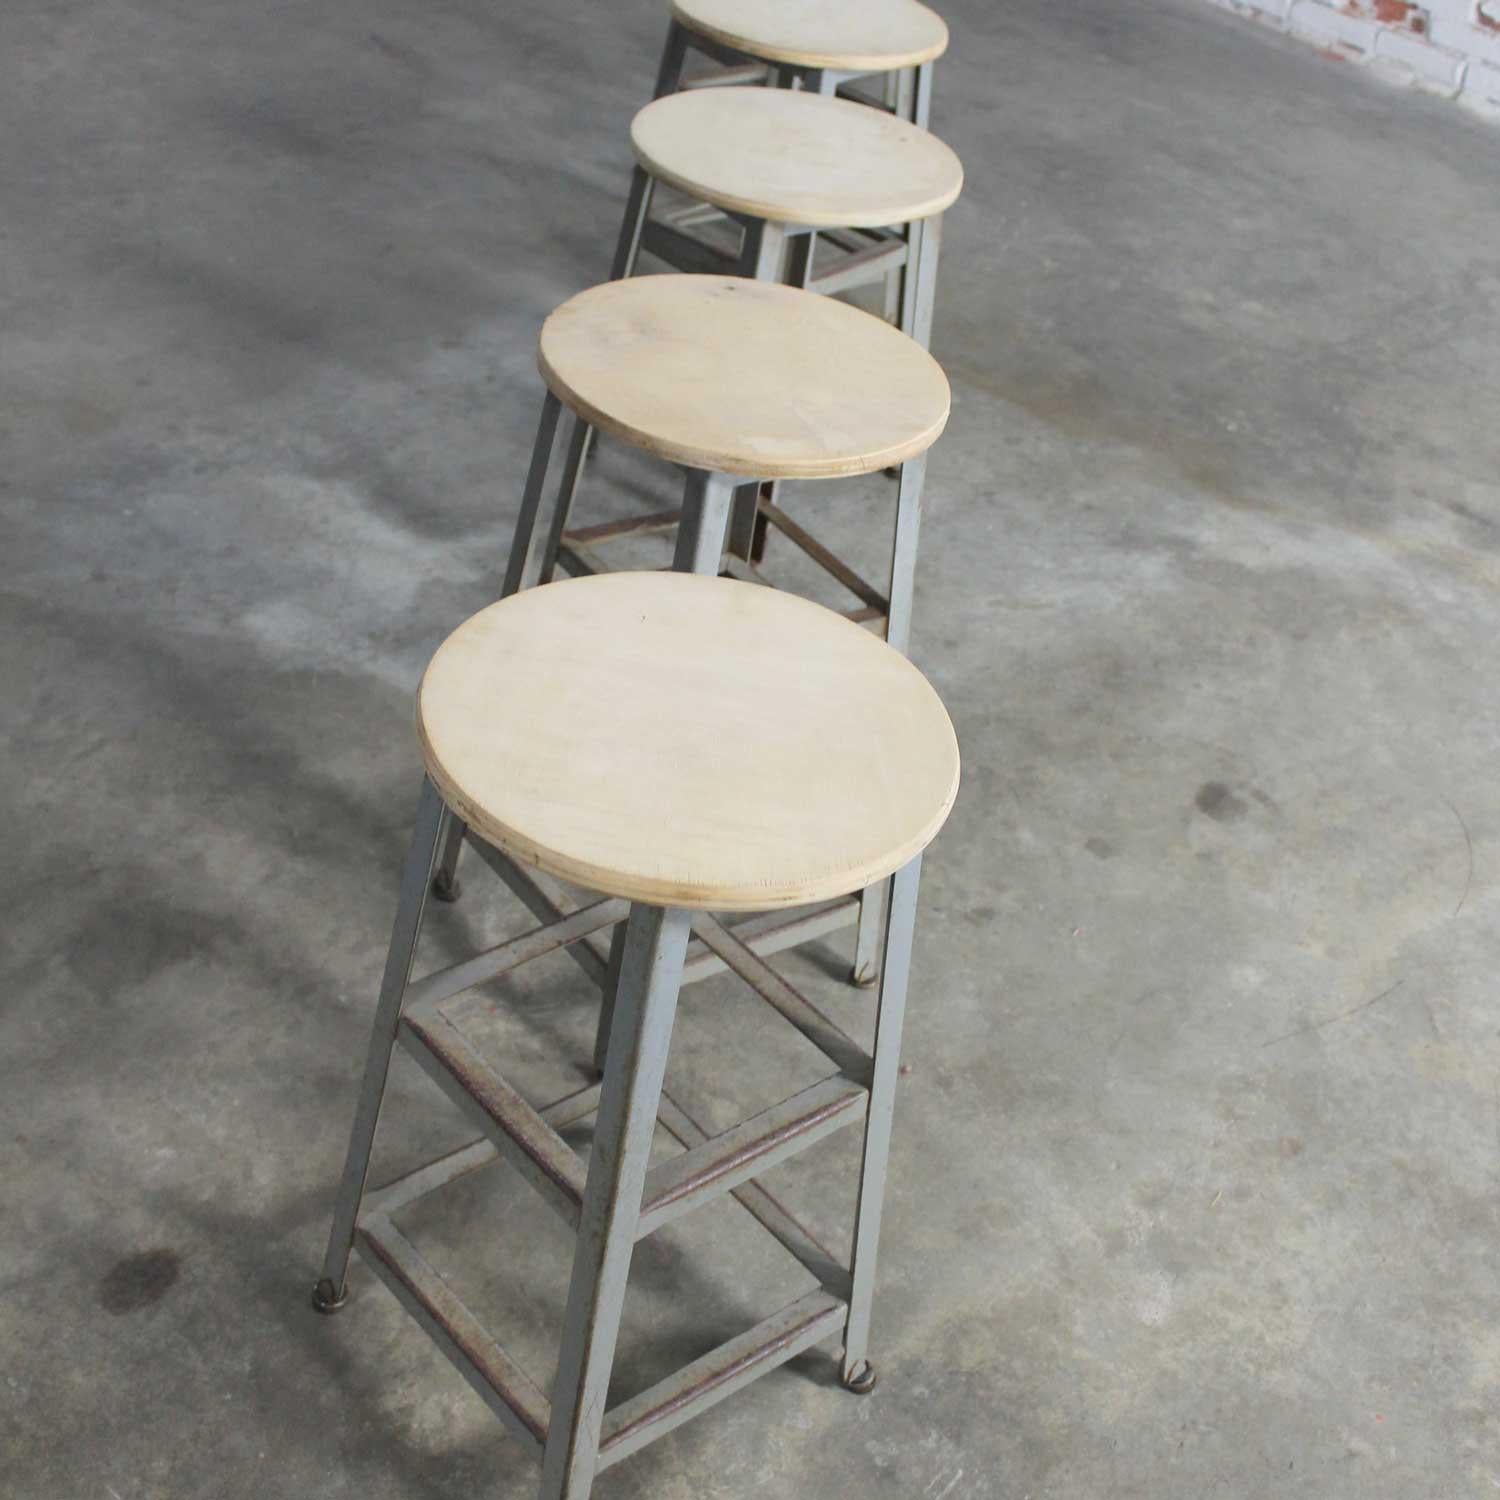 American Industrial Counter Height Stools Vintage Patinated Steel Distressed Wood Seats